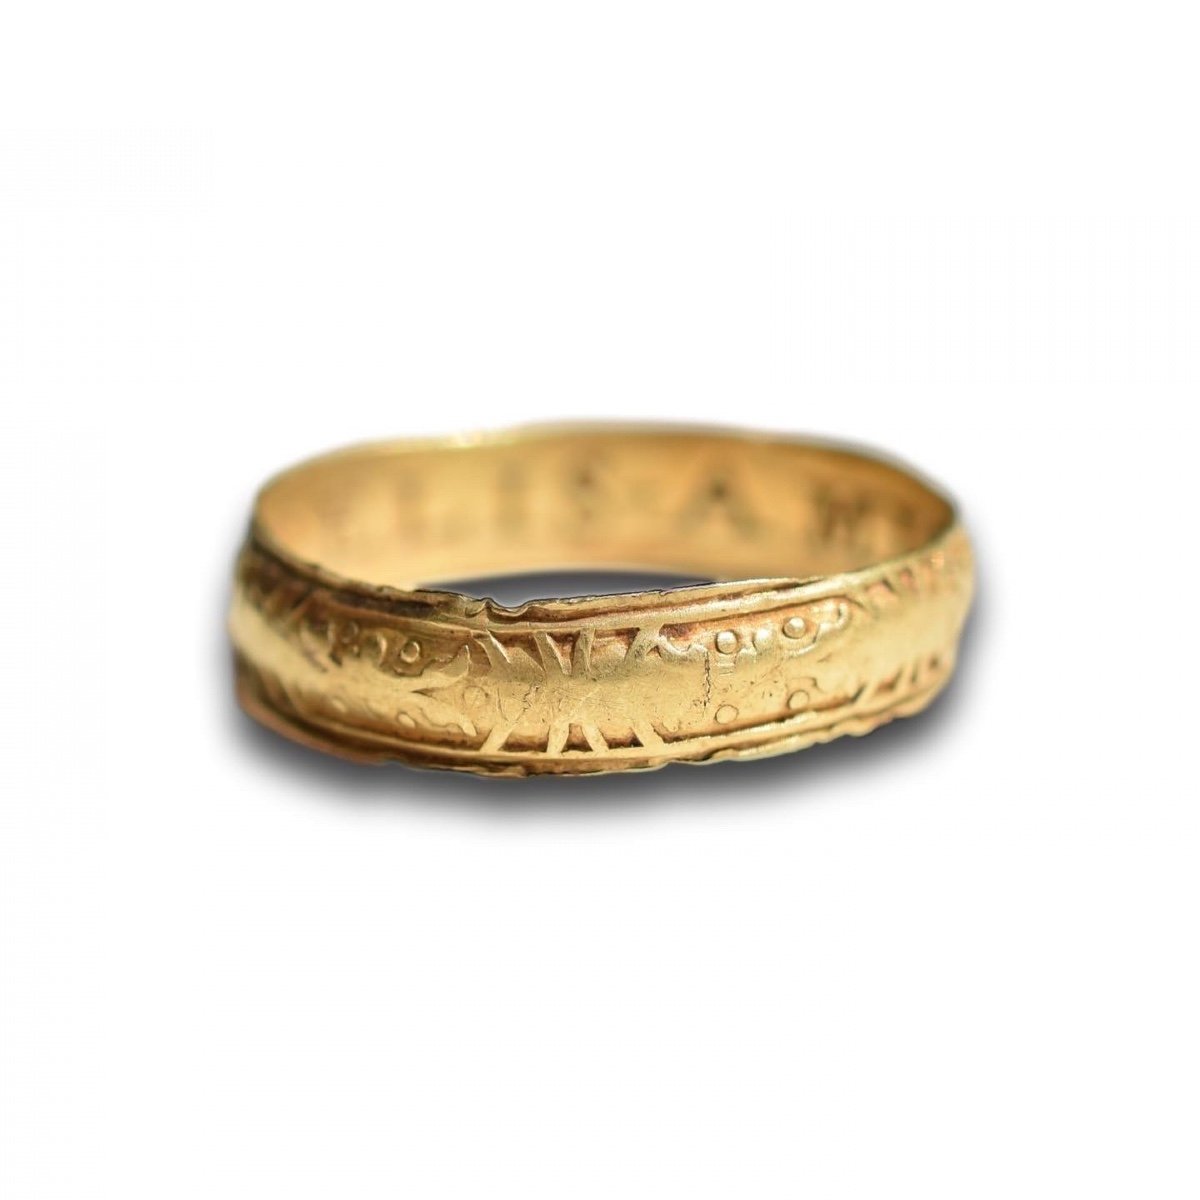 Proantic: Elizabethan Gold Posy Ring Inscribed In Latin. English, 16th